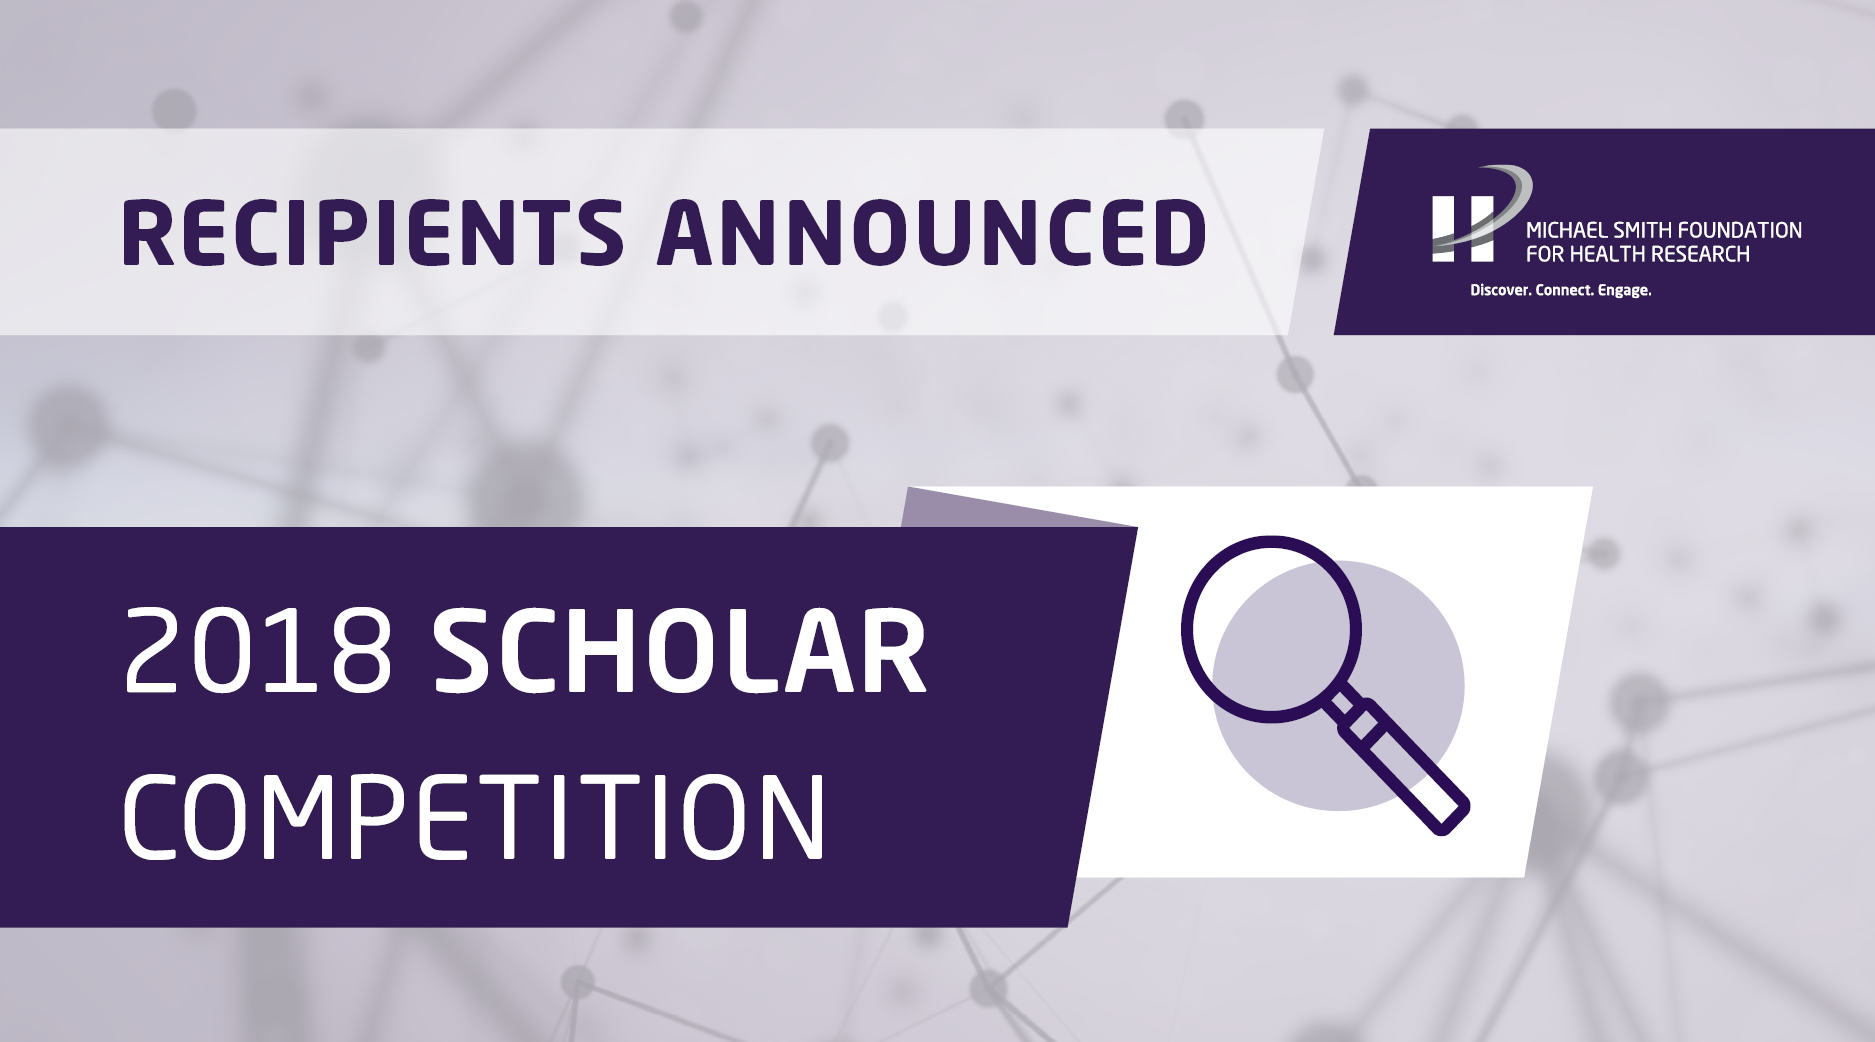 MSFHR funds 17 exceptional early-career researchers in 2018 Scholar competition